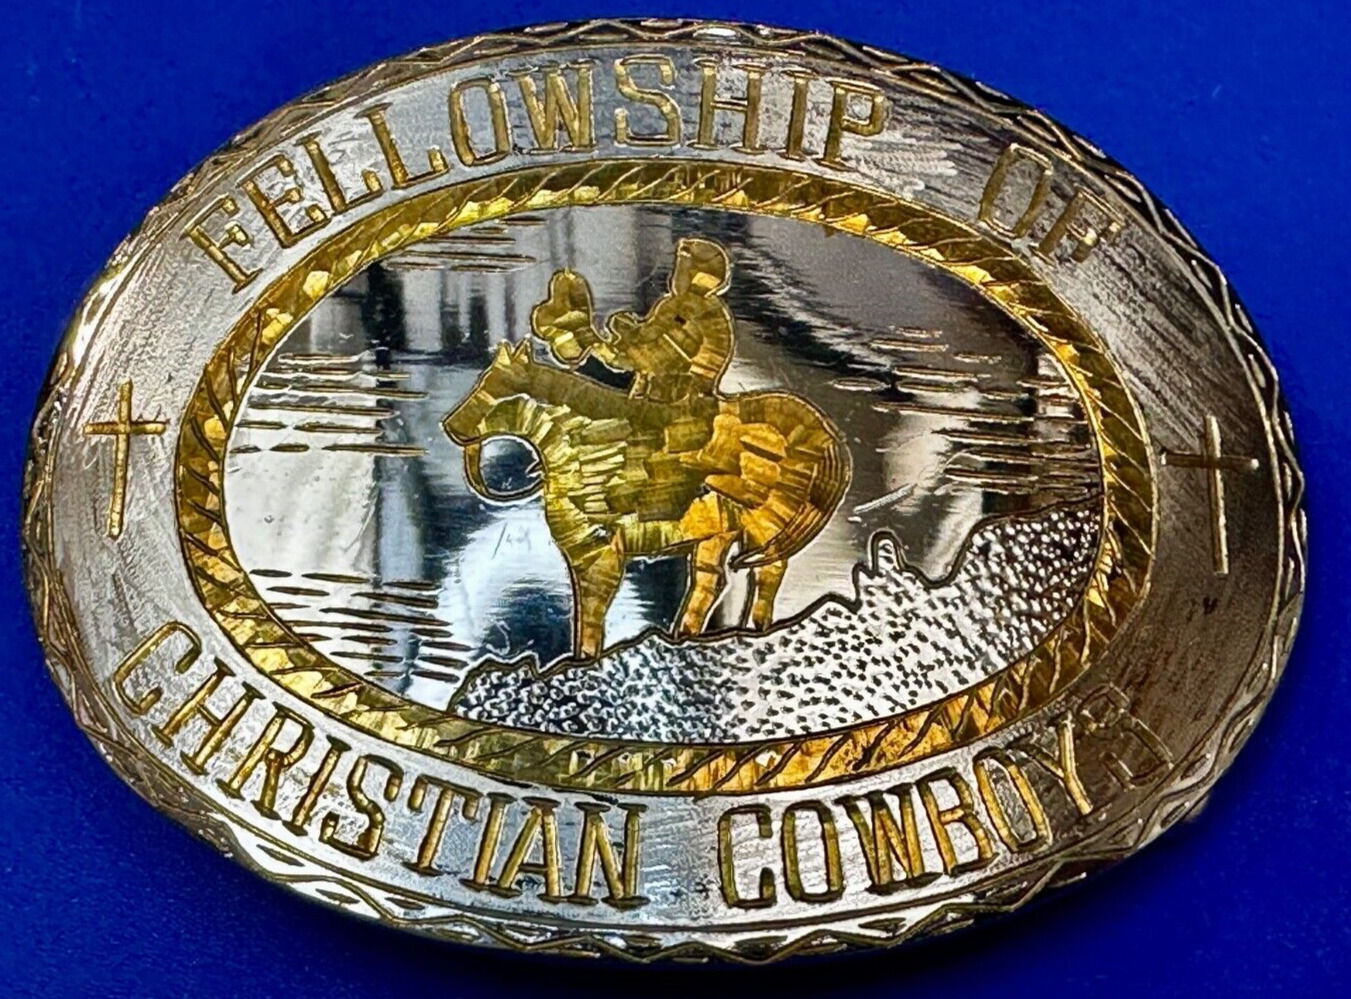 Fellowship of Christian Cowboys Vintage Religious Trophy Style Belt Buckle